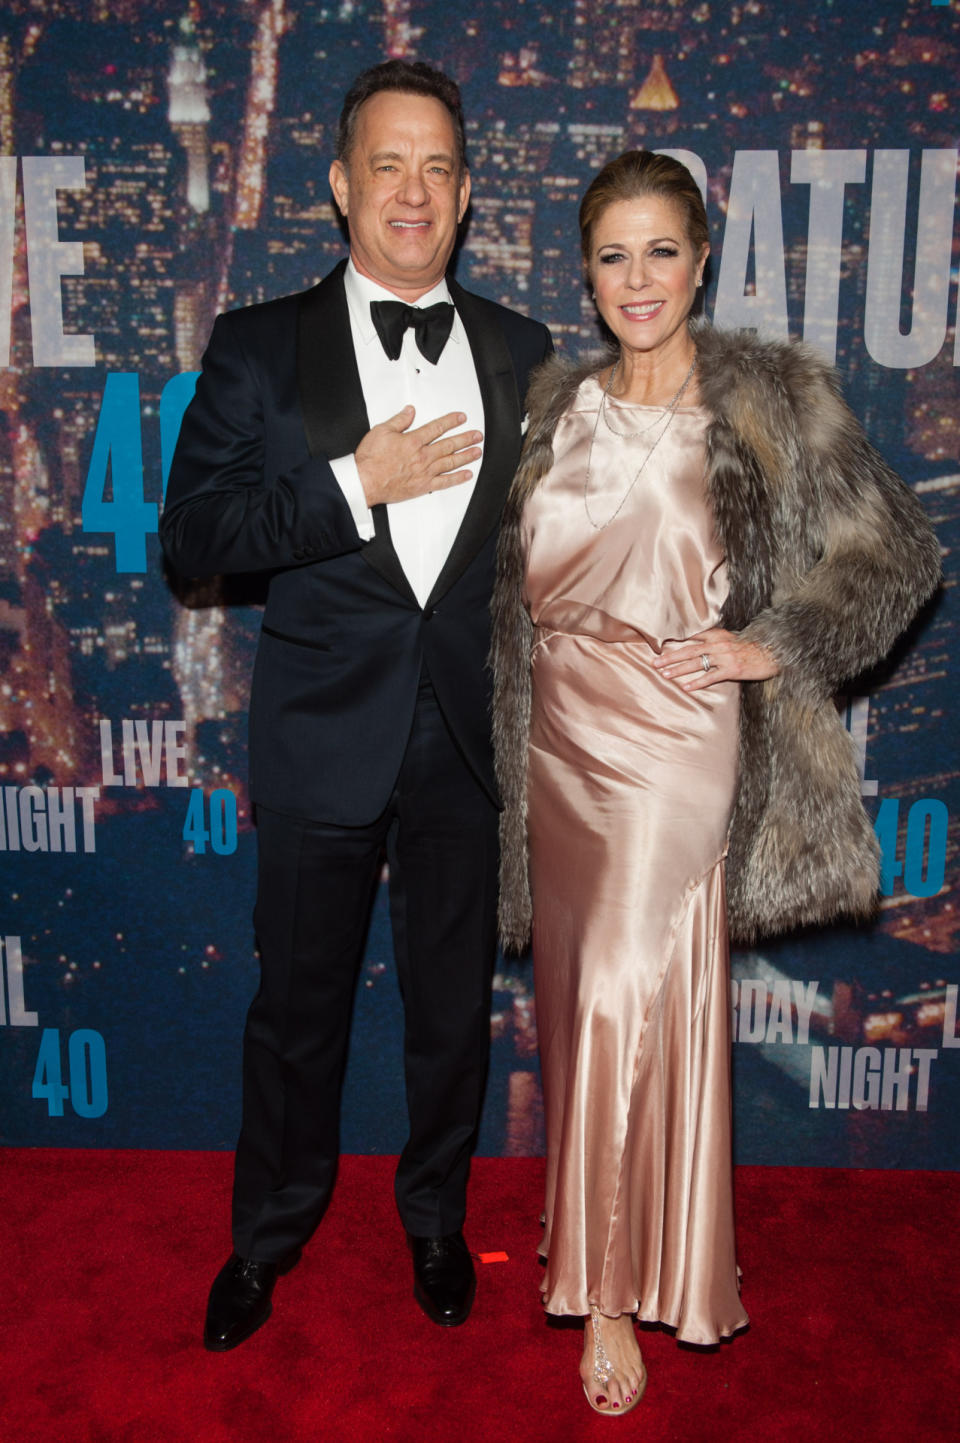 Rita Wilson was maybe the only woman to wear a Spring color to a Winter event — and it looked amazing! Her husband looks pretty good too in a tux.